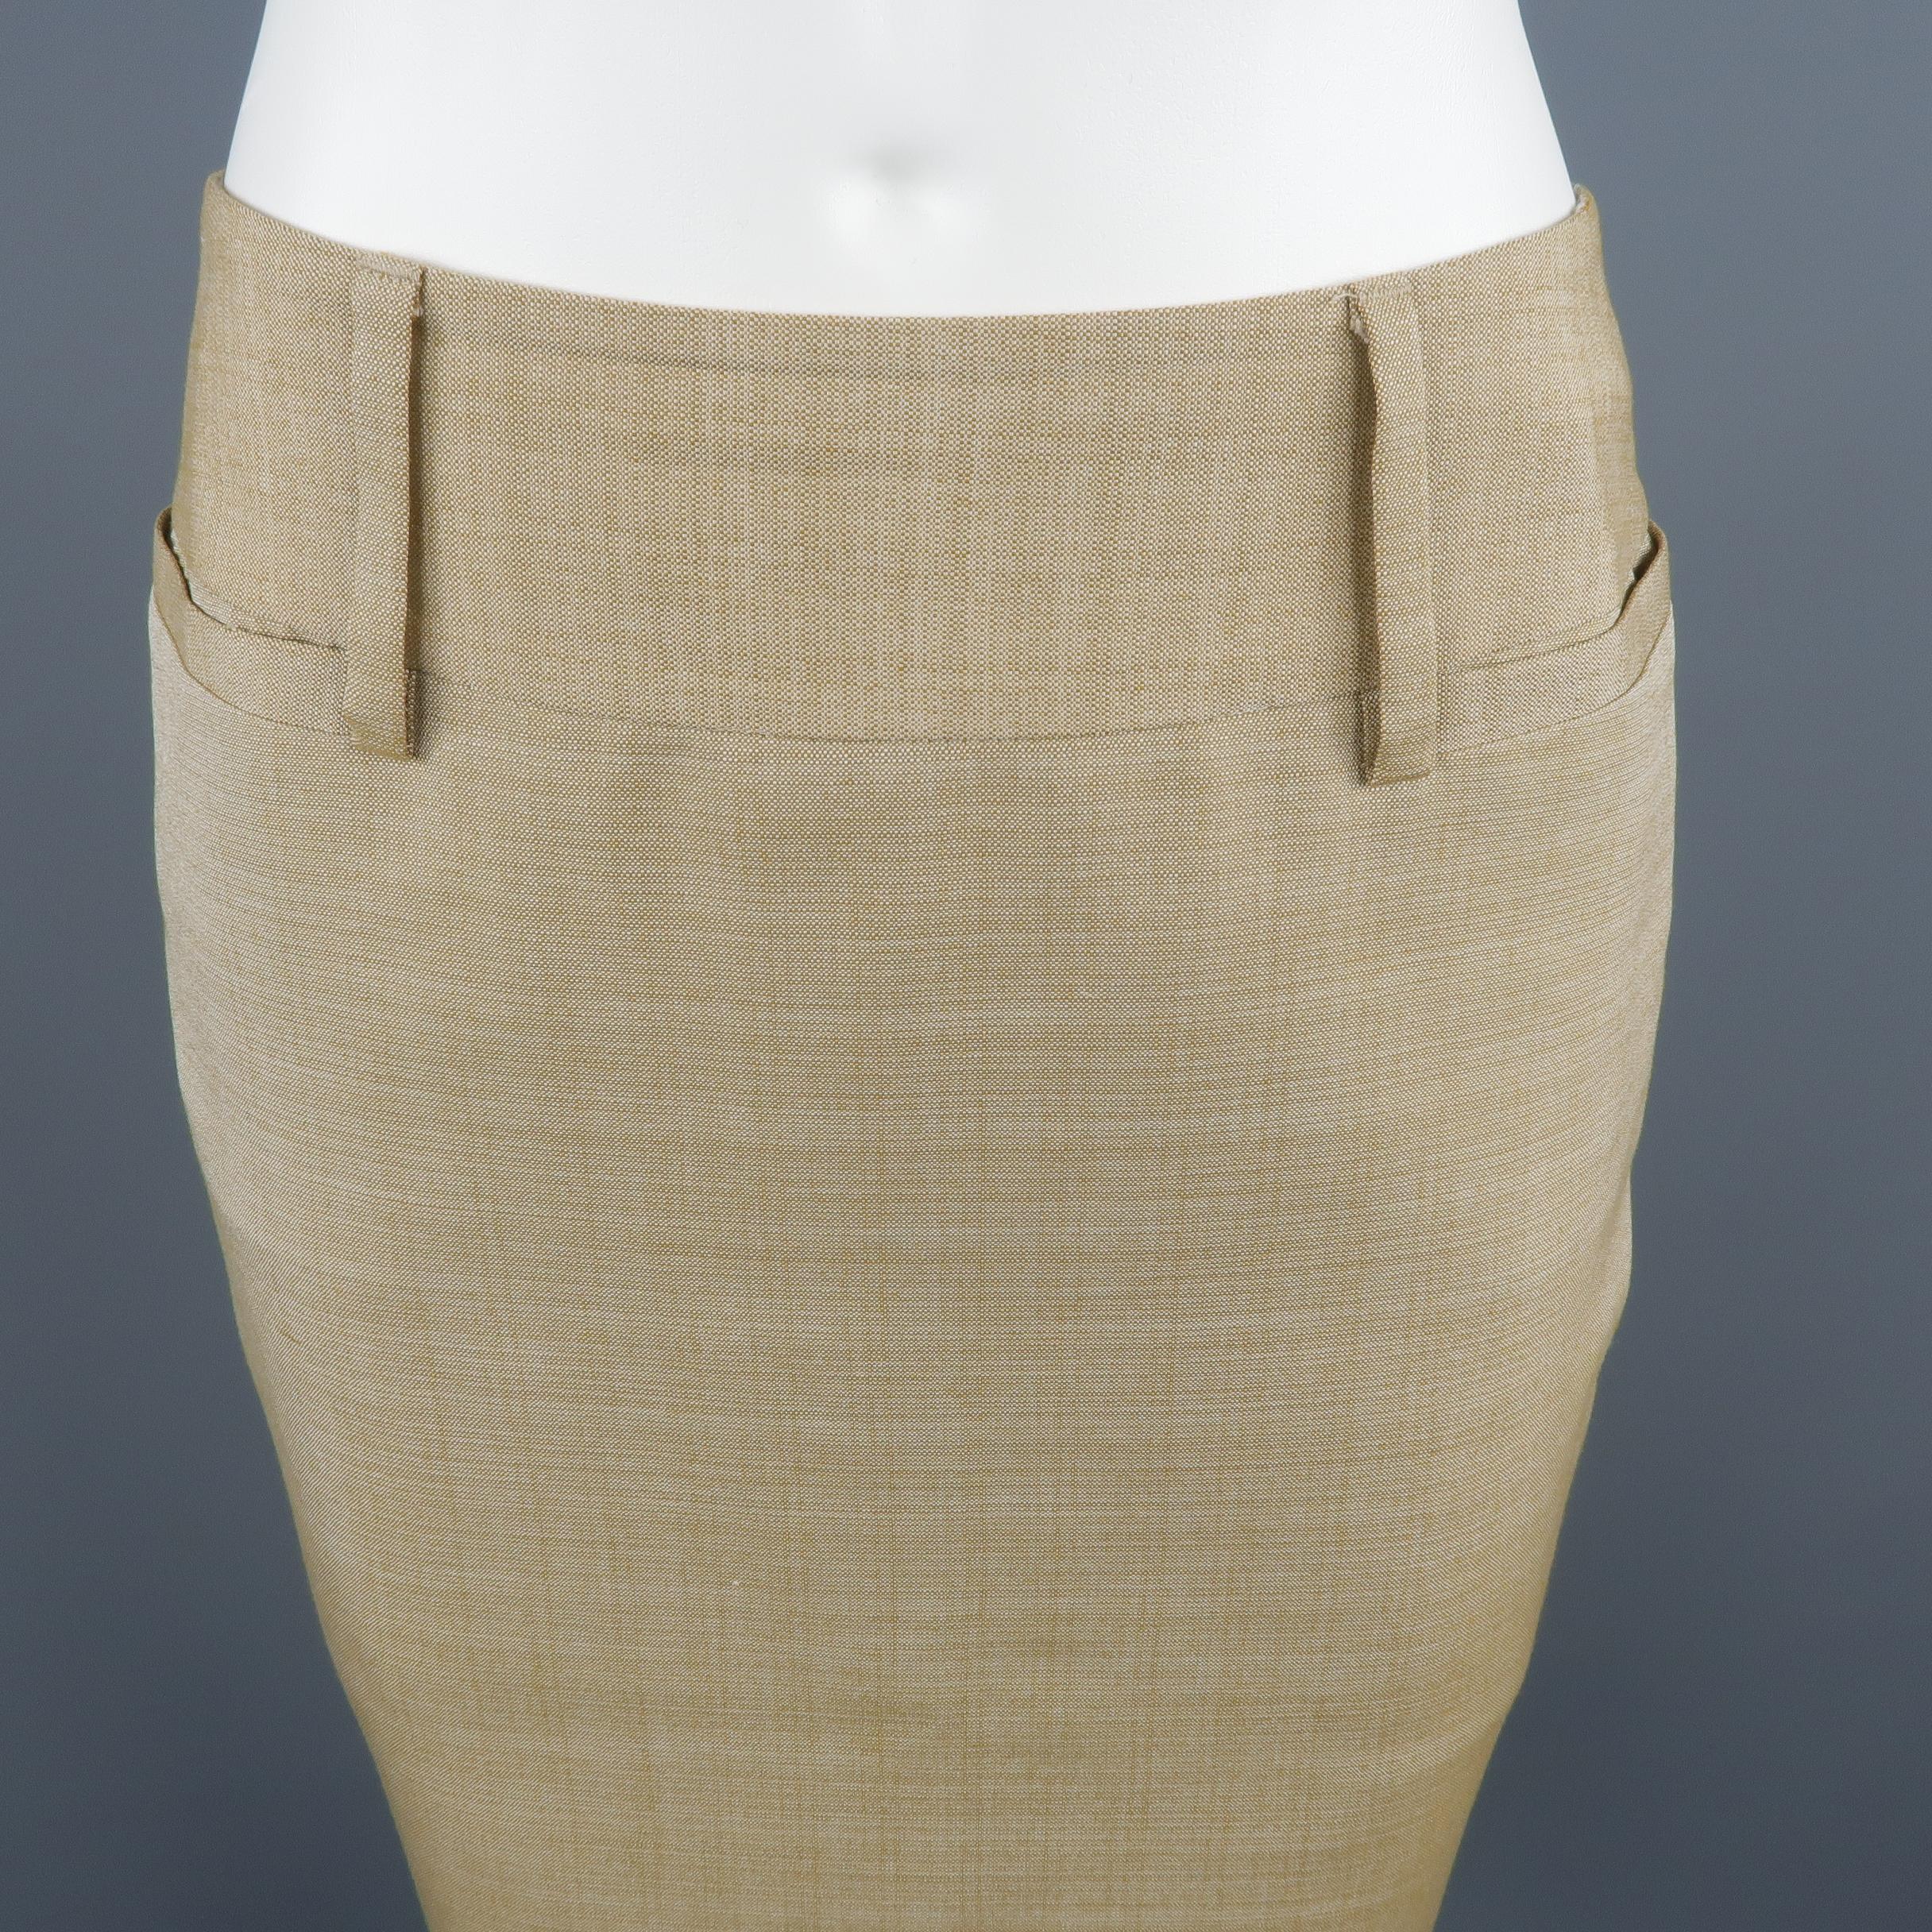 DOLCE & GABBANA classic pencil skirt, come in beige tone and silk material, featuring frontal pockets, belt loops, vent on the back and animal print lining. Small signal of use, with a peeling close to the hem on the left side. Made in Italy.
